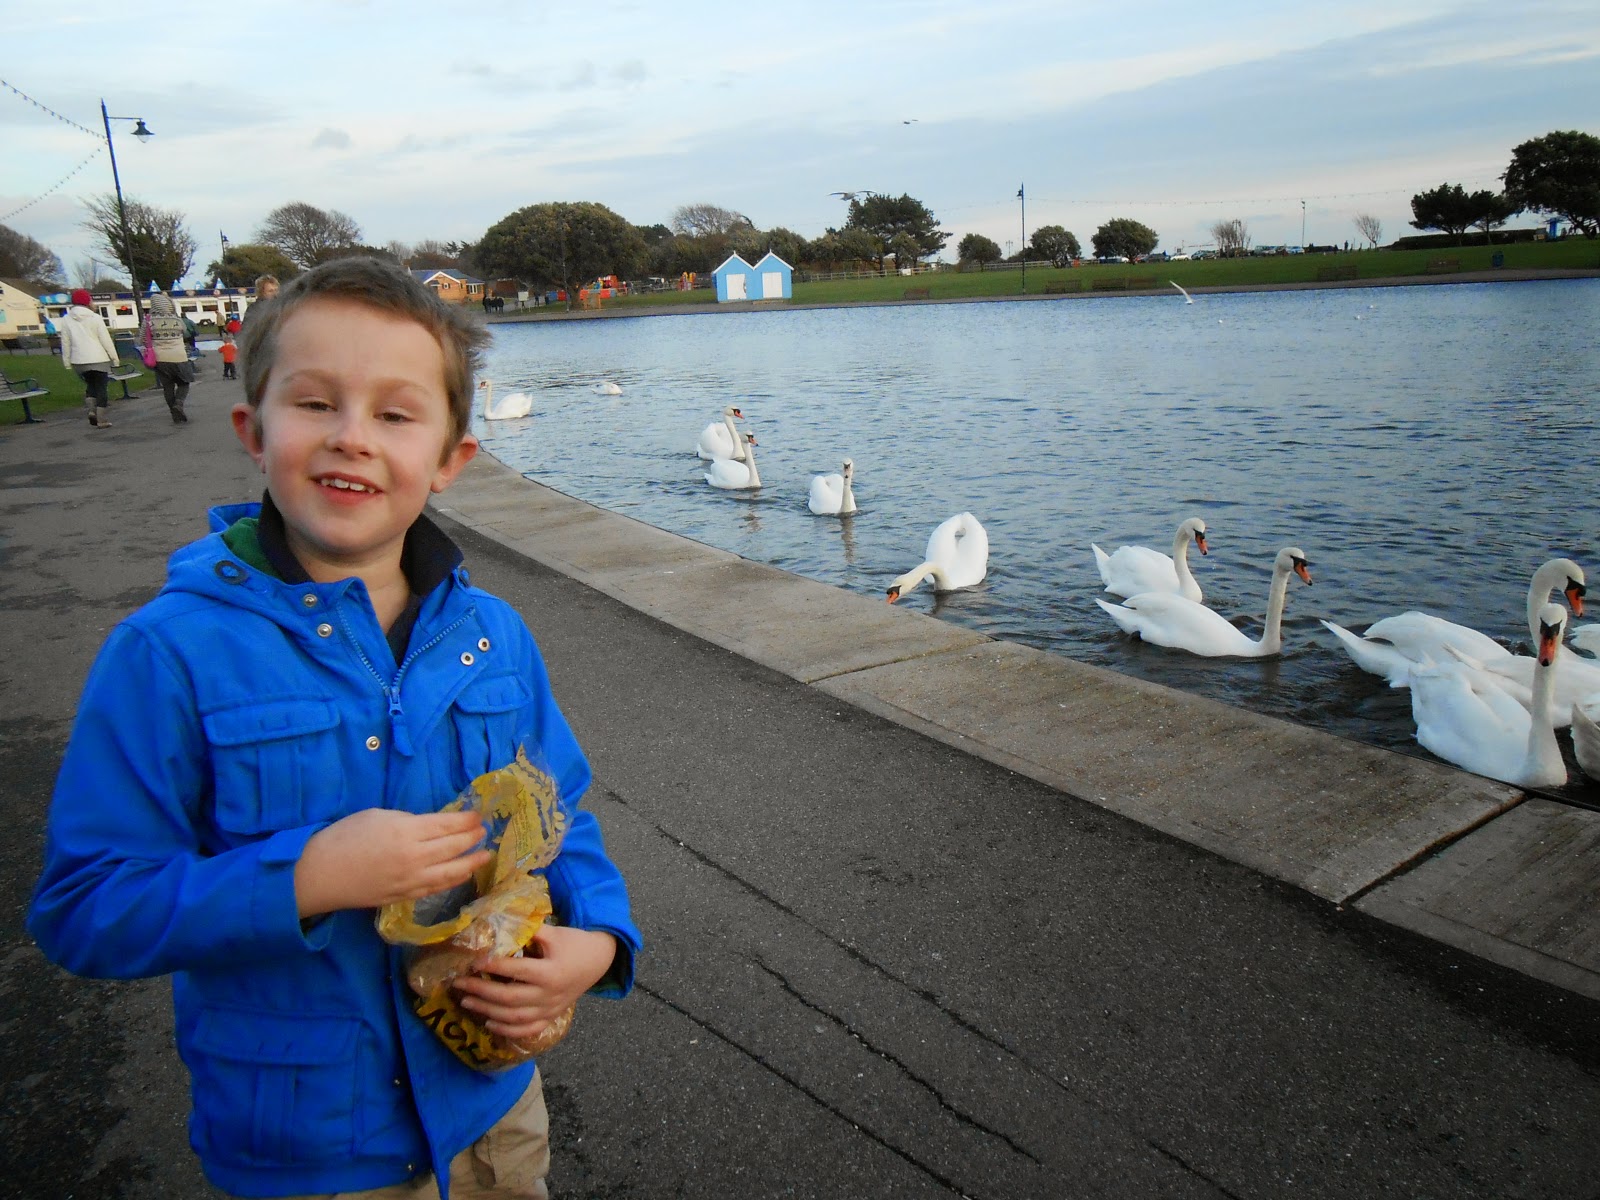 boy in the blue coat laughing at swans